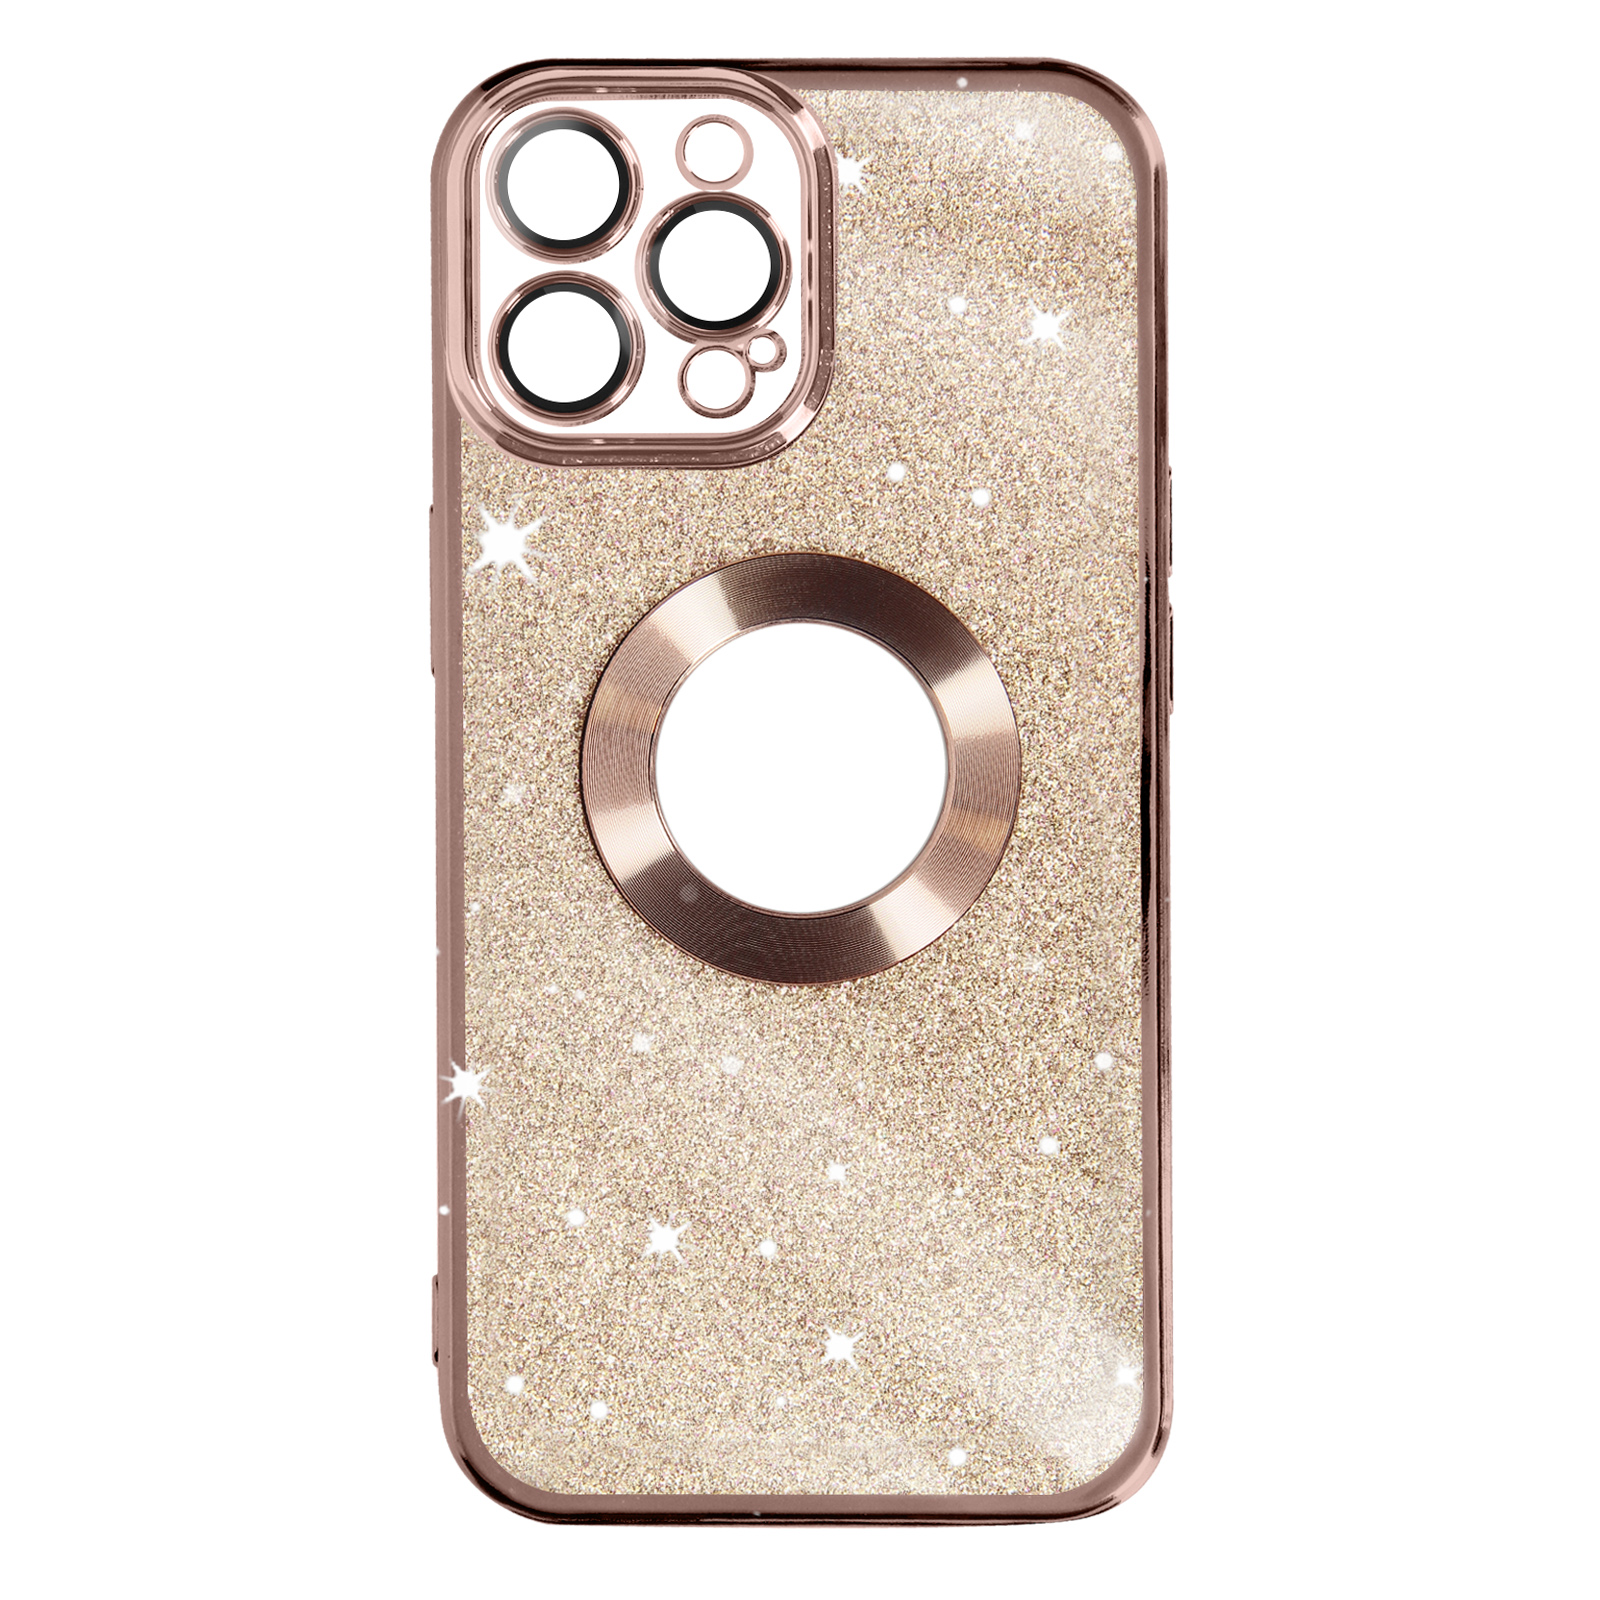 Series, Backcover, Spark 13 Pro Max, iPhone AVIZAR Apple, Protecam Rosegold